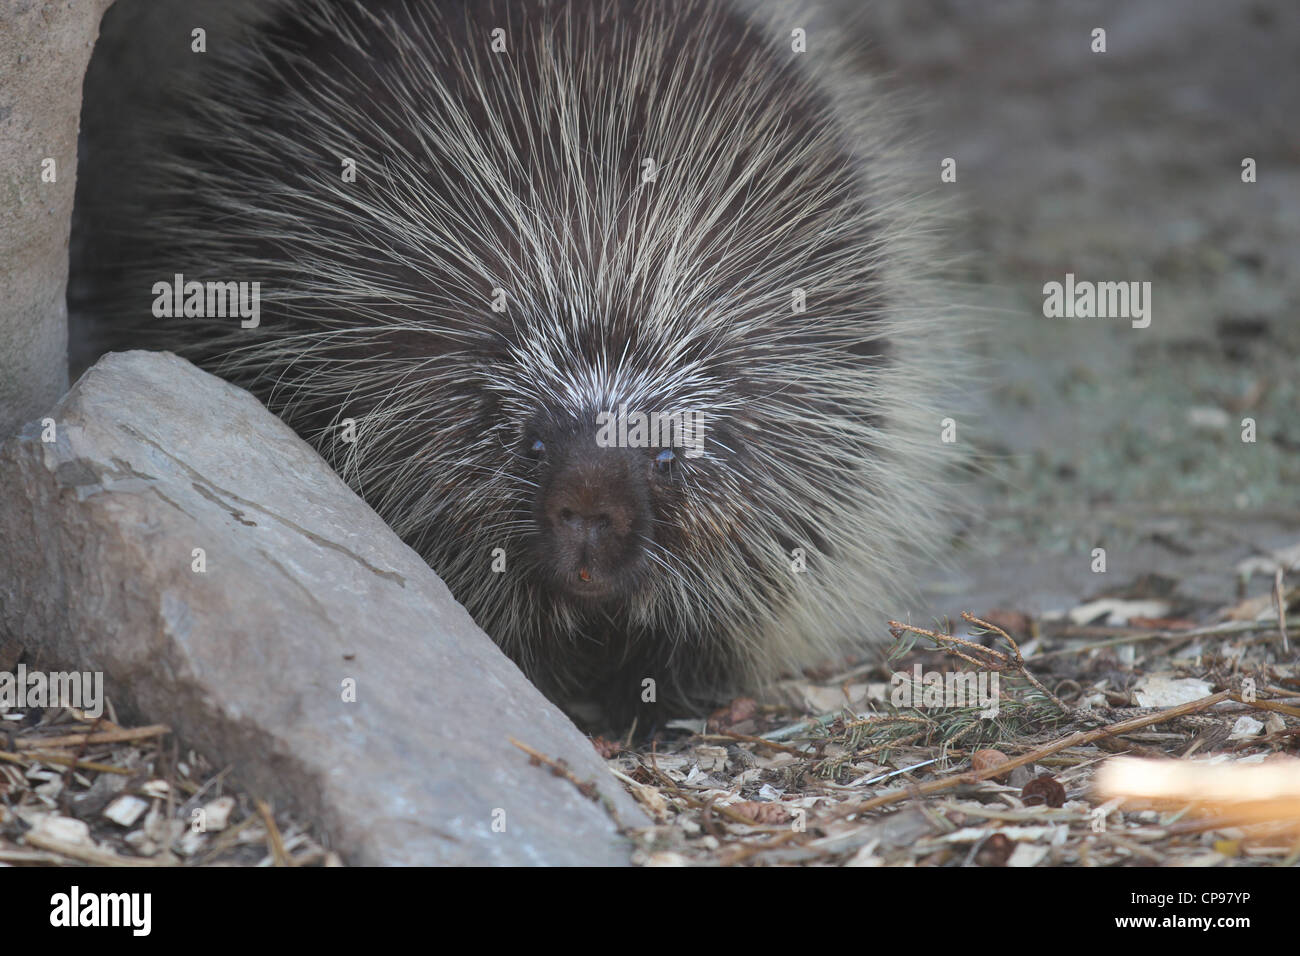 North American Porcupine front view close up Stock Photo